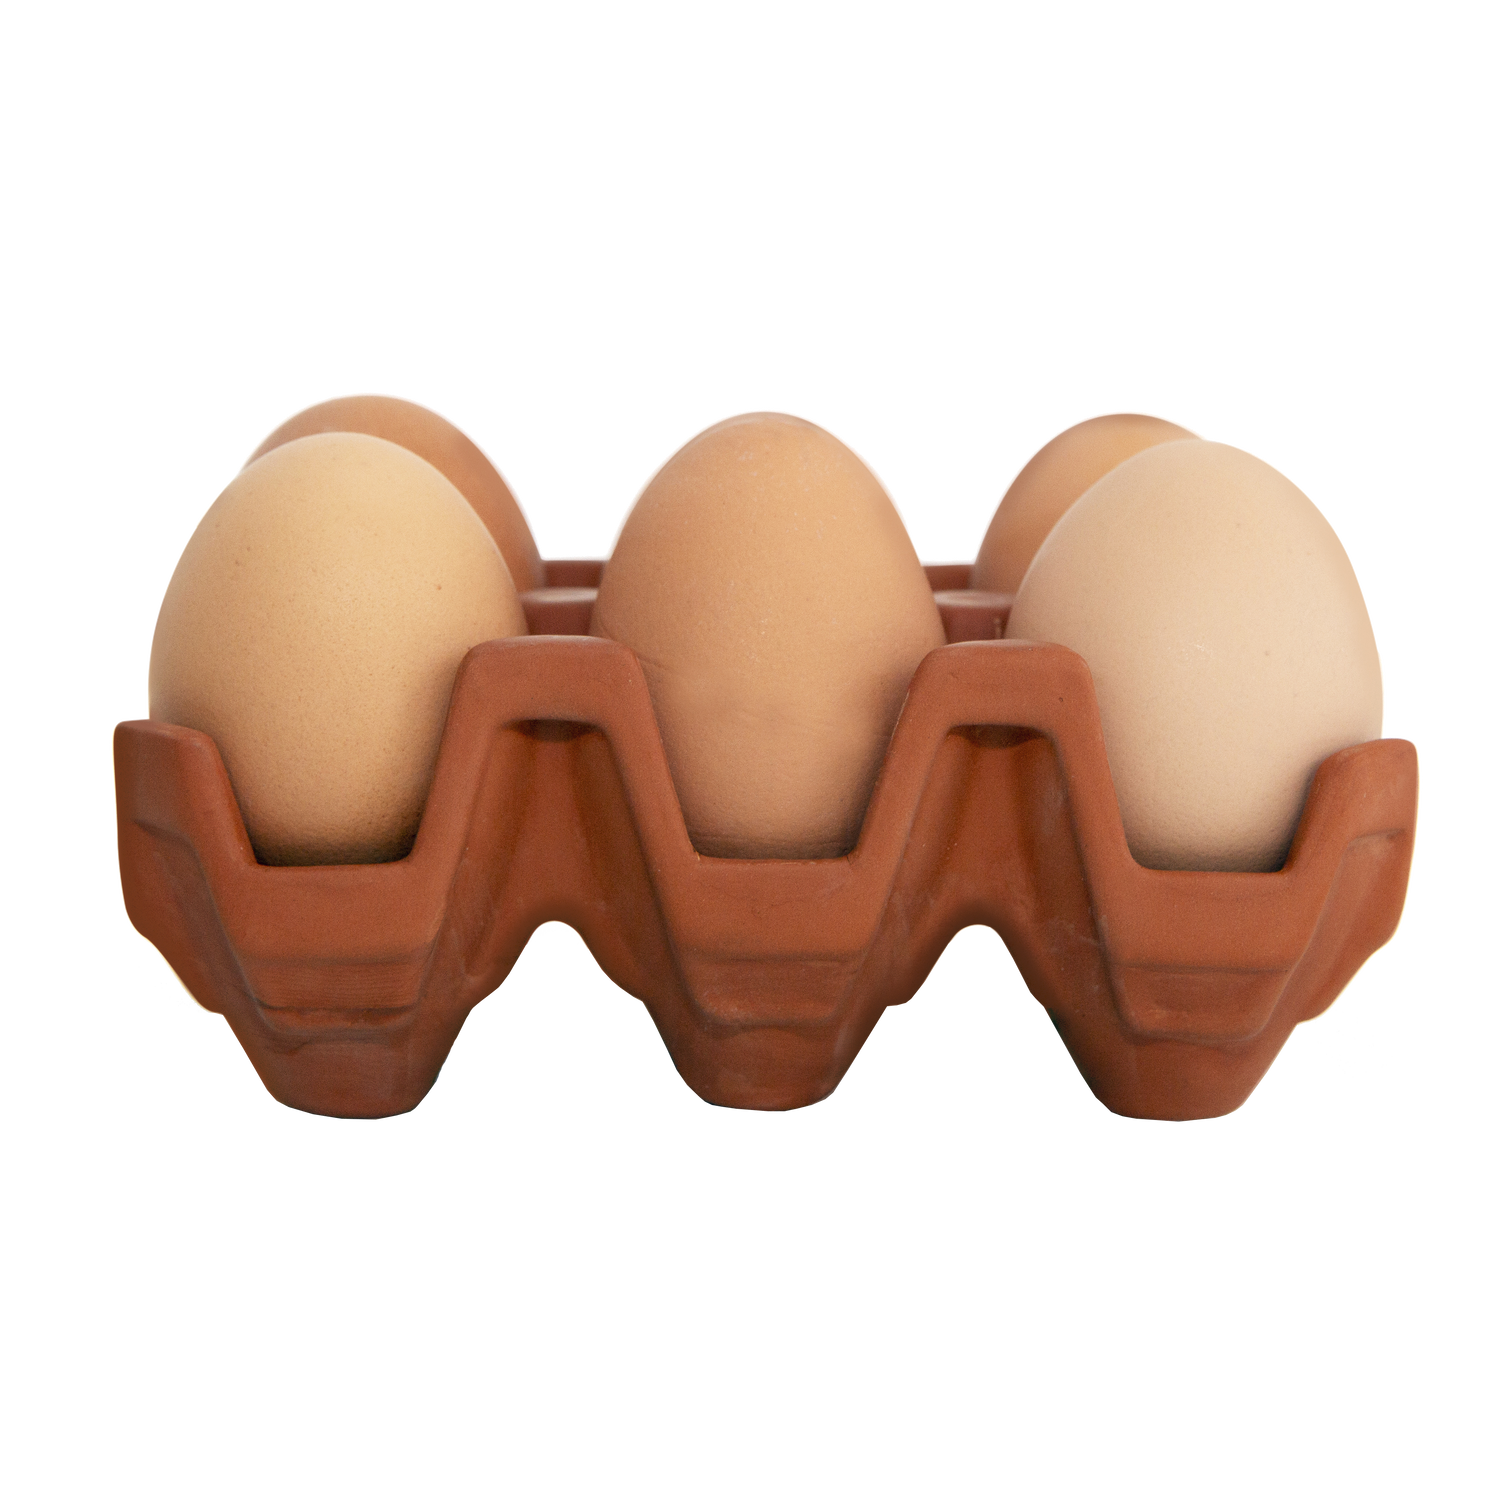 Terracotta egg racks are an ideal way to store your eggs .Designed from the traditional cardboard trays. Holds 6 eggs 
Designer: KDT 
Product Measurement: 5.5